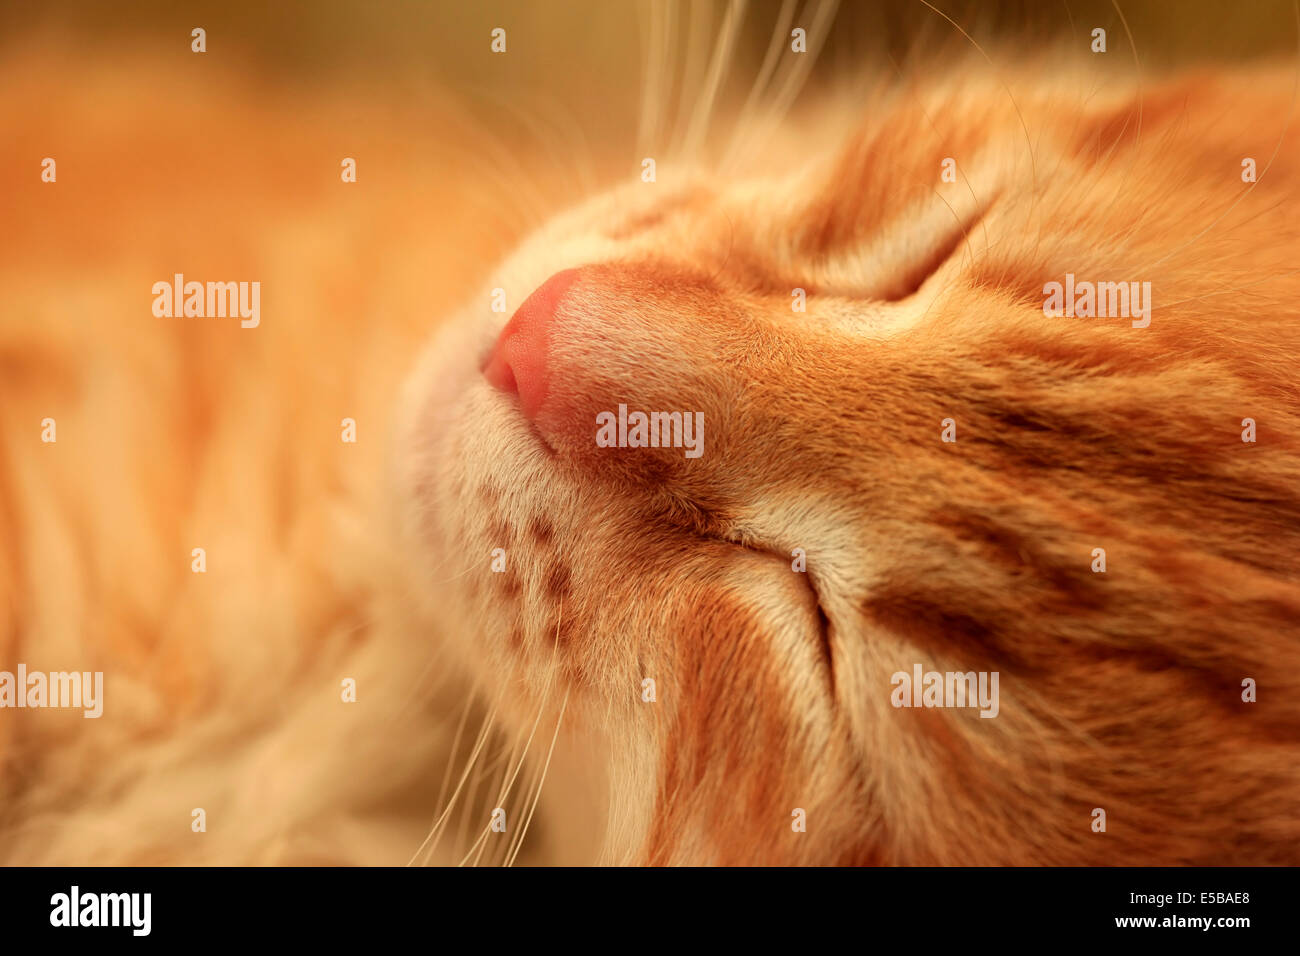 Sleepy of a young red-haired kitten Stock Photo